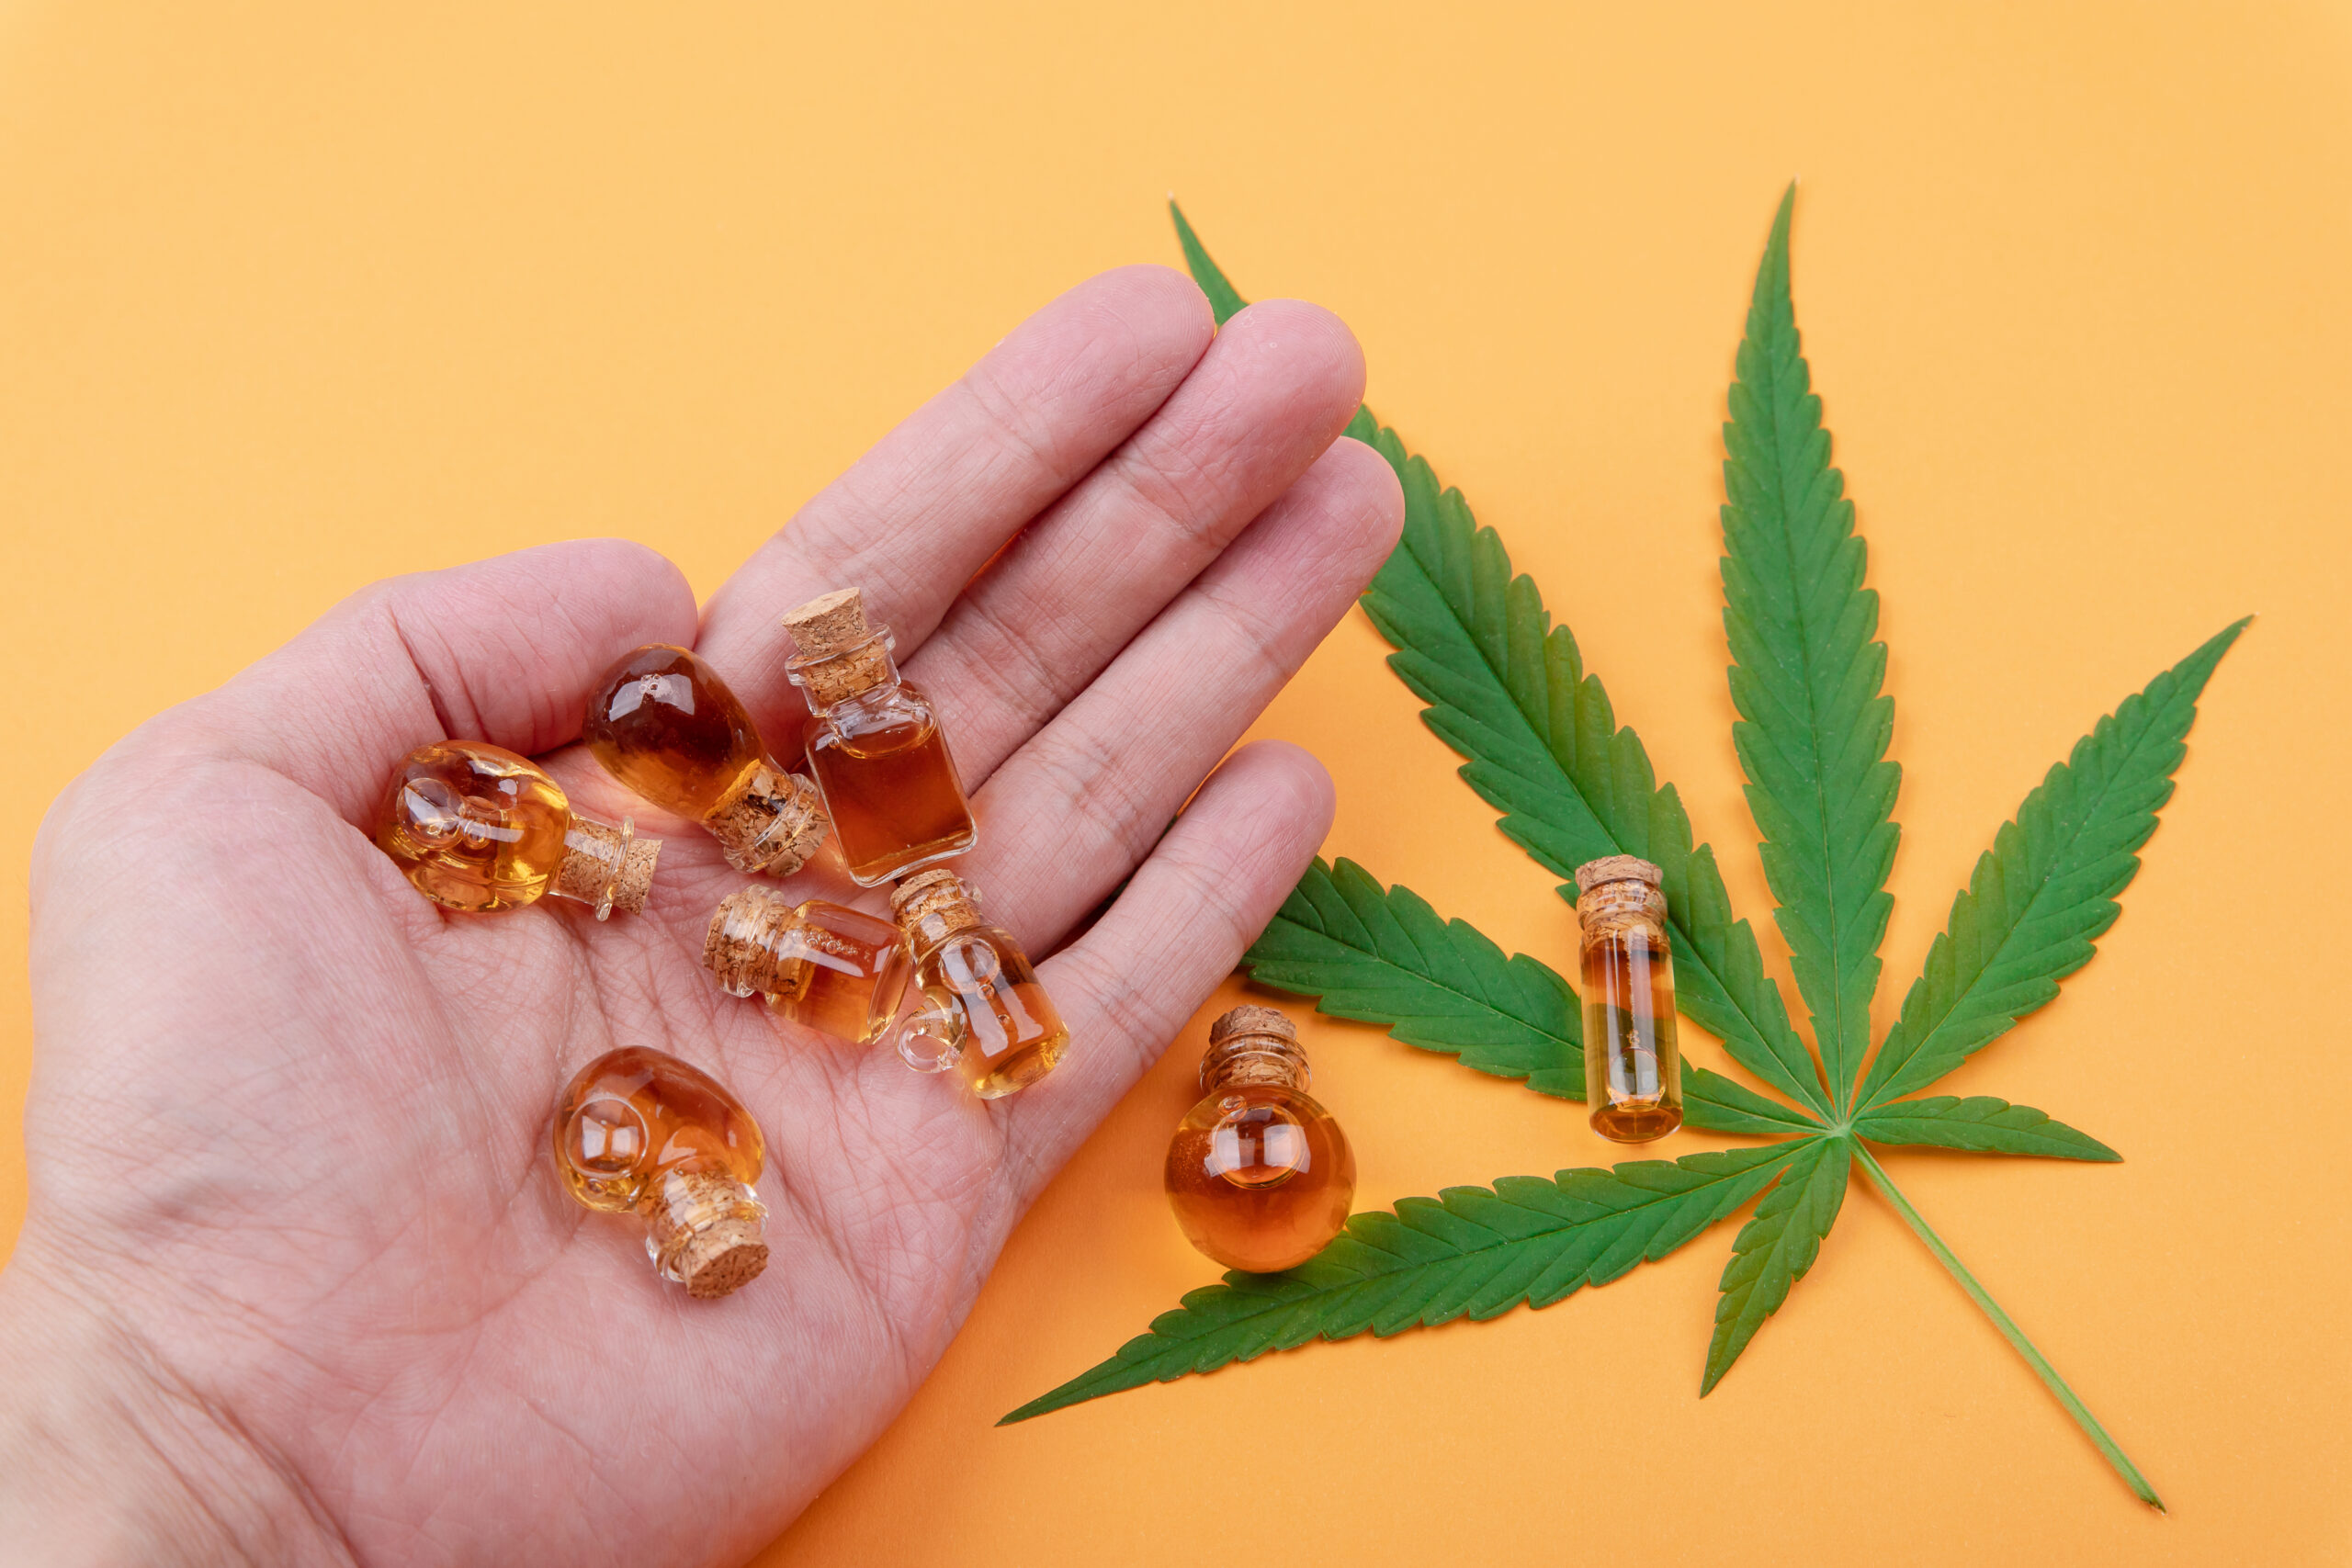 How To Determine The Quality Of Cannabis Resin